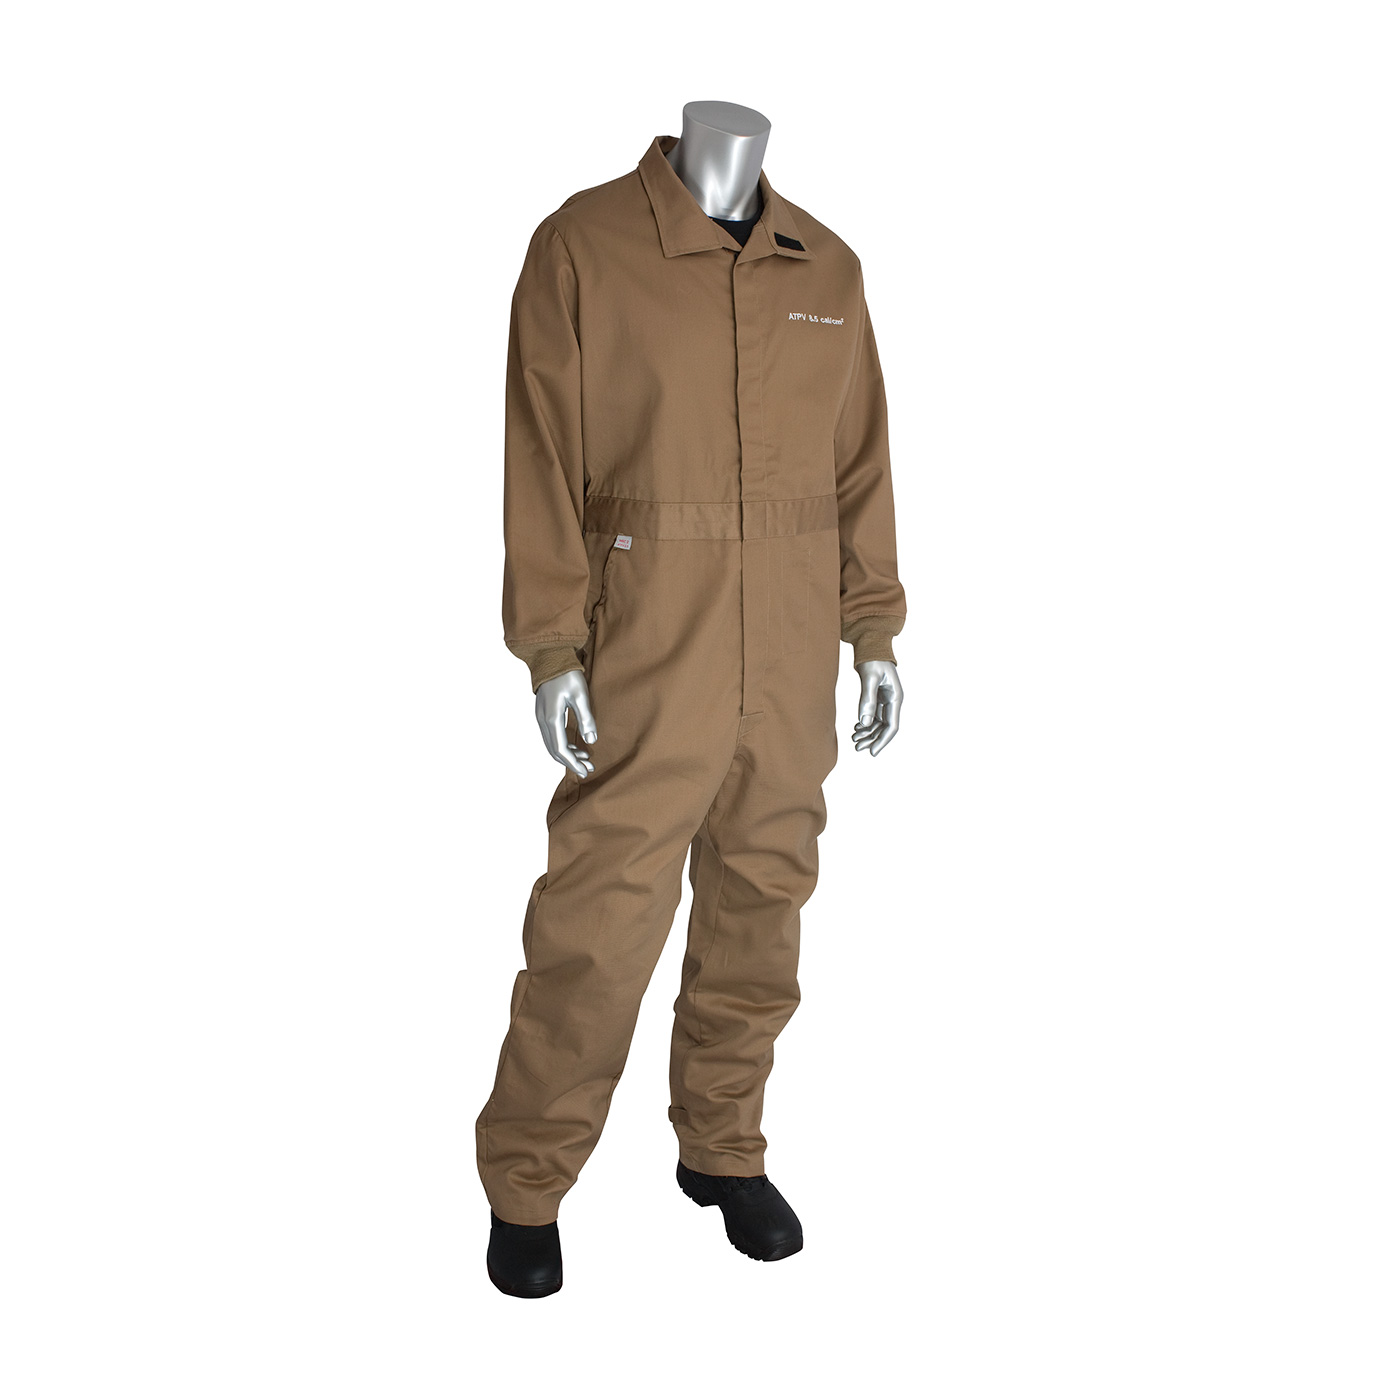 PIP® Tan 7oz. Dual Certified 8 Cal/cm2 Fire Resistant Vented Back Coverall